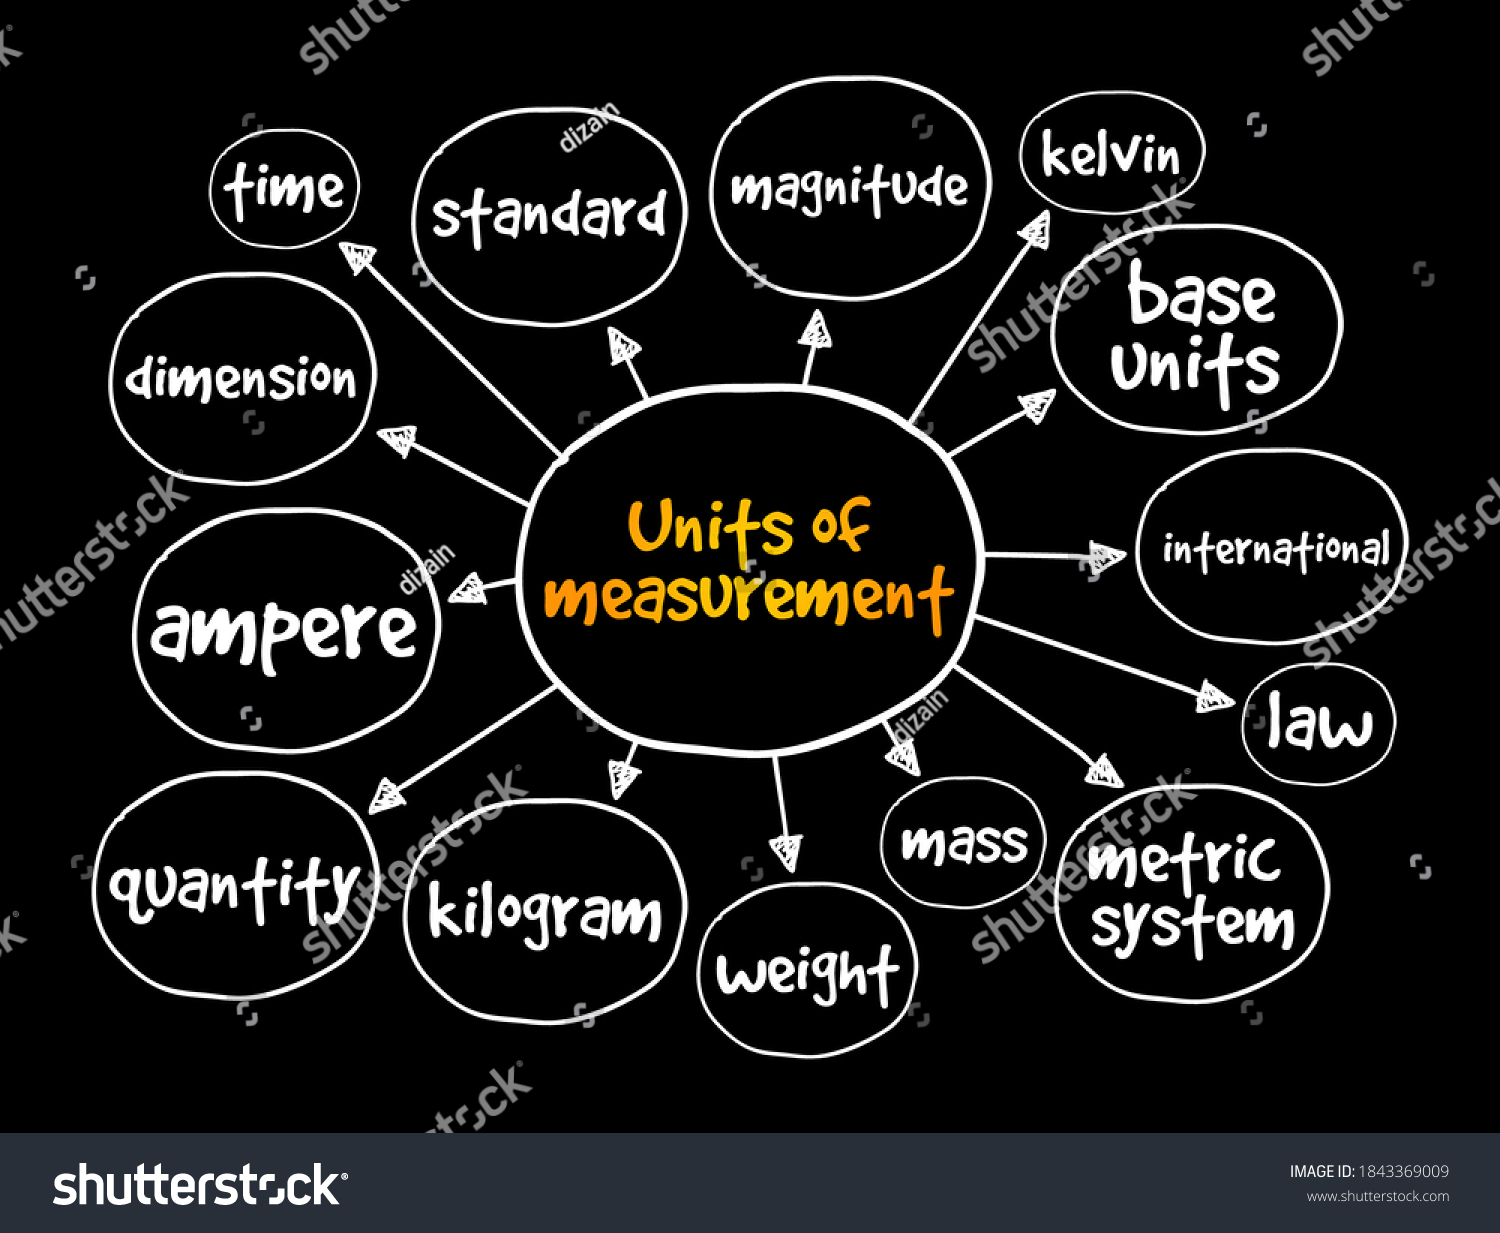 Units Measurement Mind Map Concept Presentations Stock Vector Royalty Free 1843369009 4404